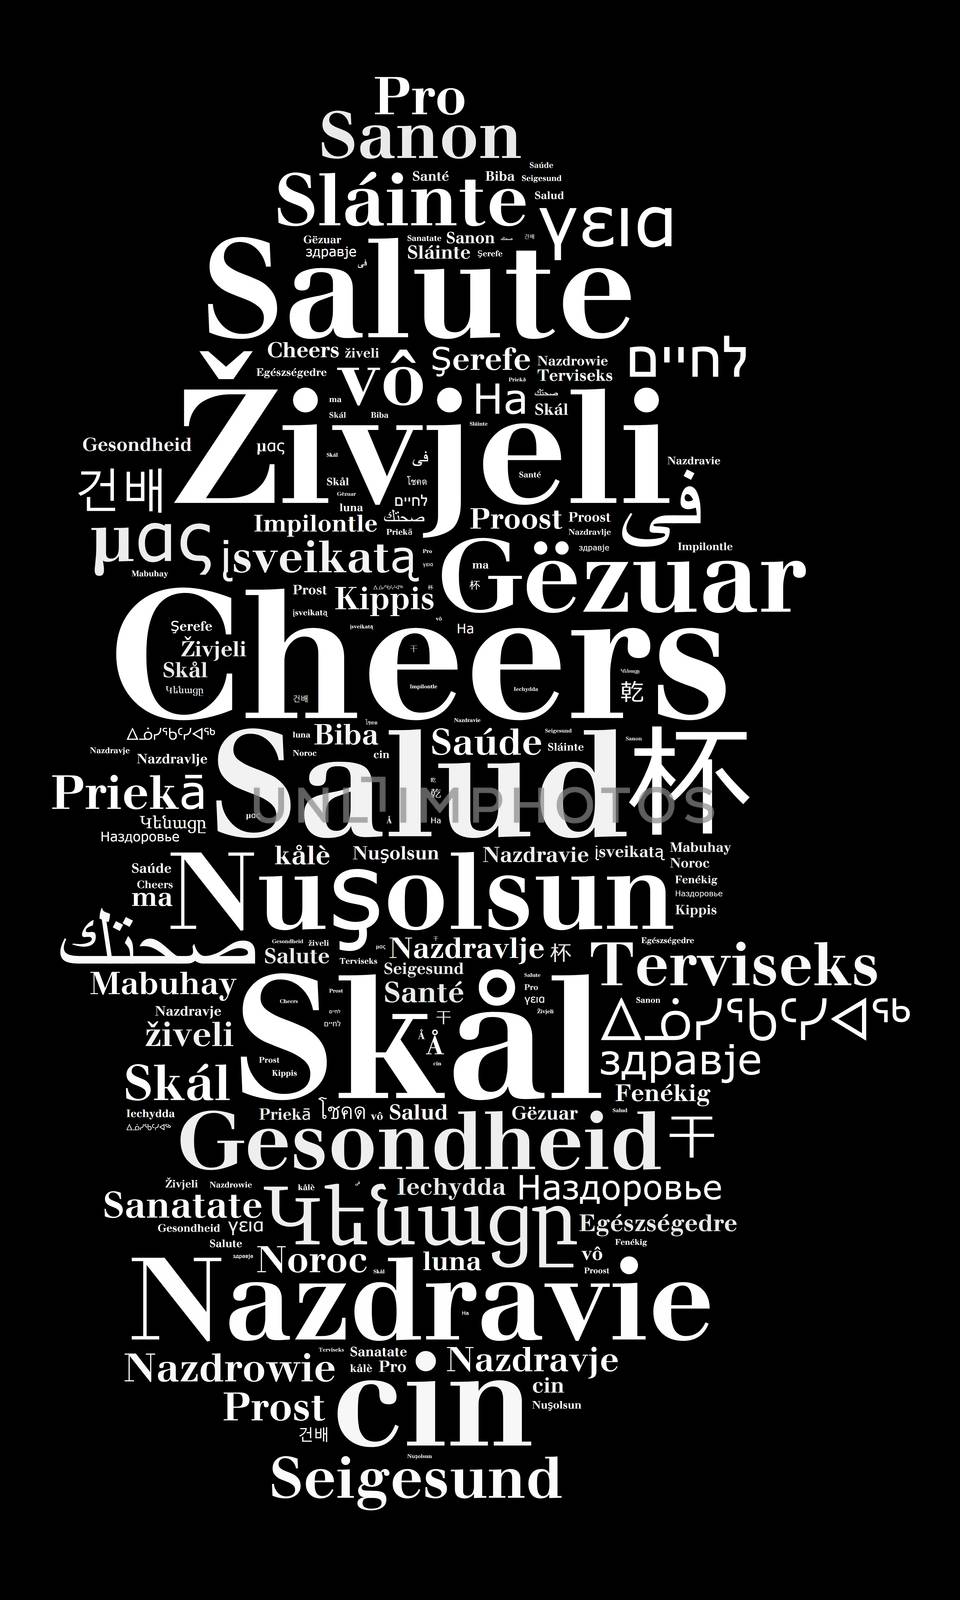 Word Cheers in different languages word cloud concept